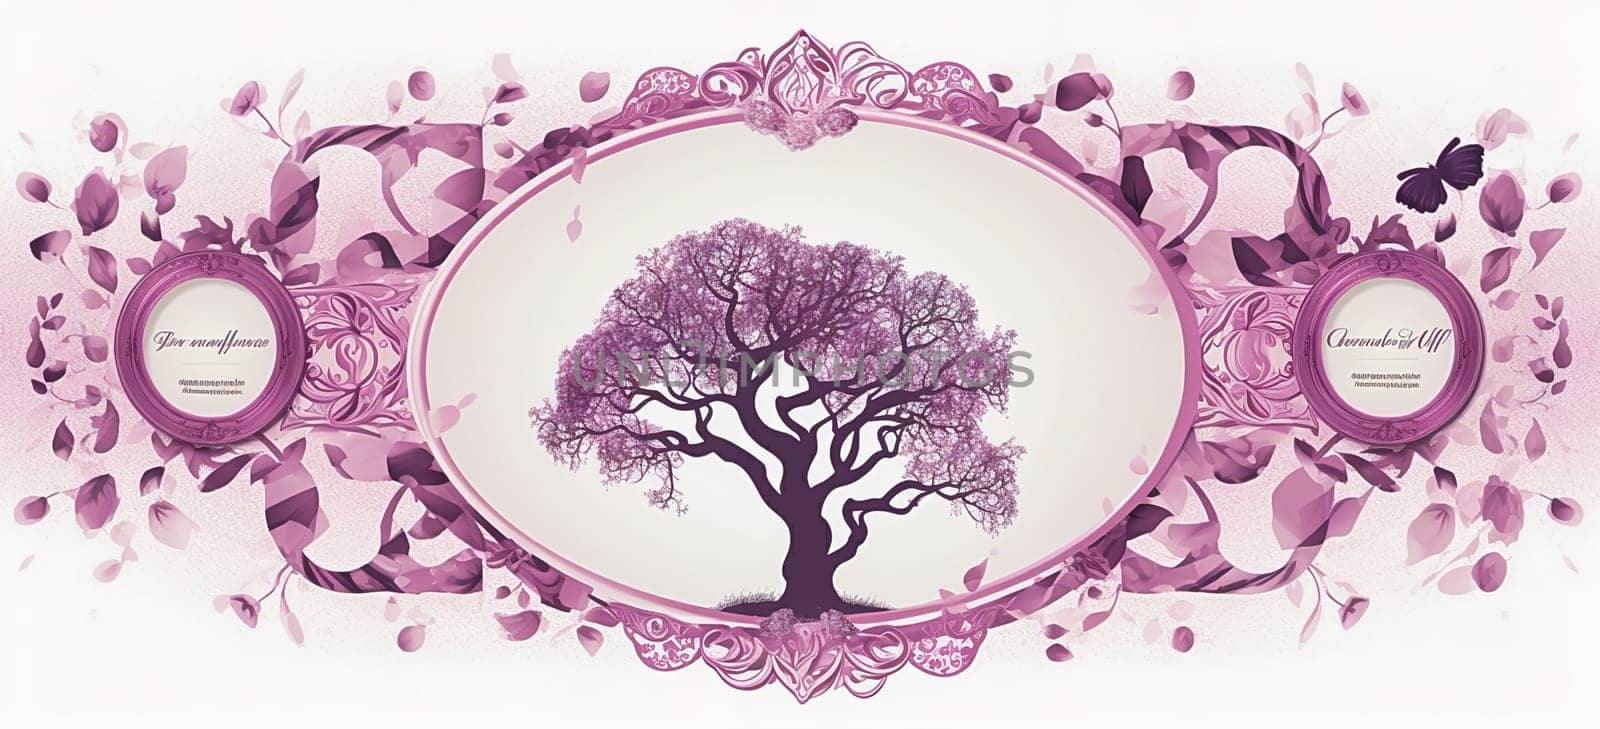 Family tree illustration, template for a mug in purple tones. by Yurich32